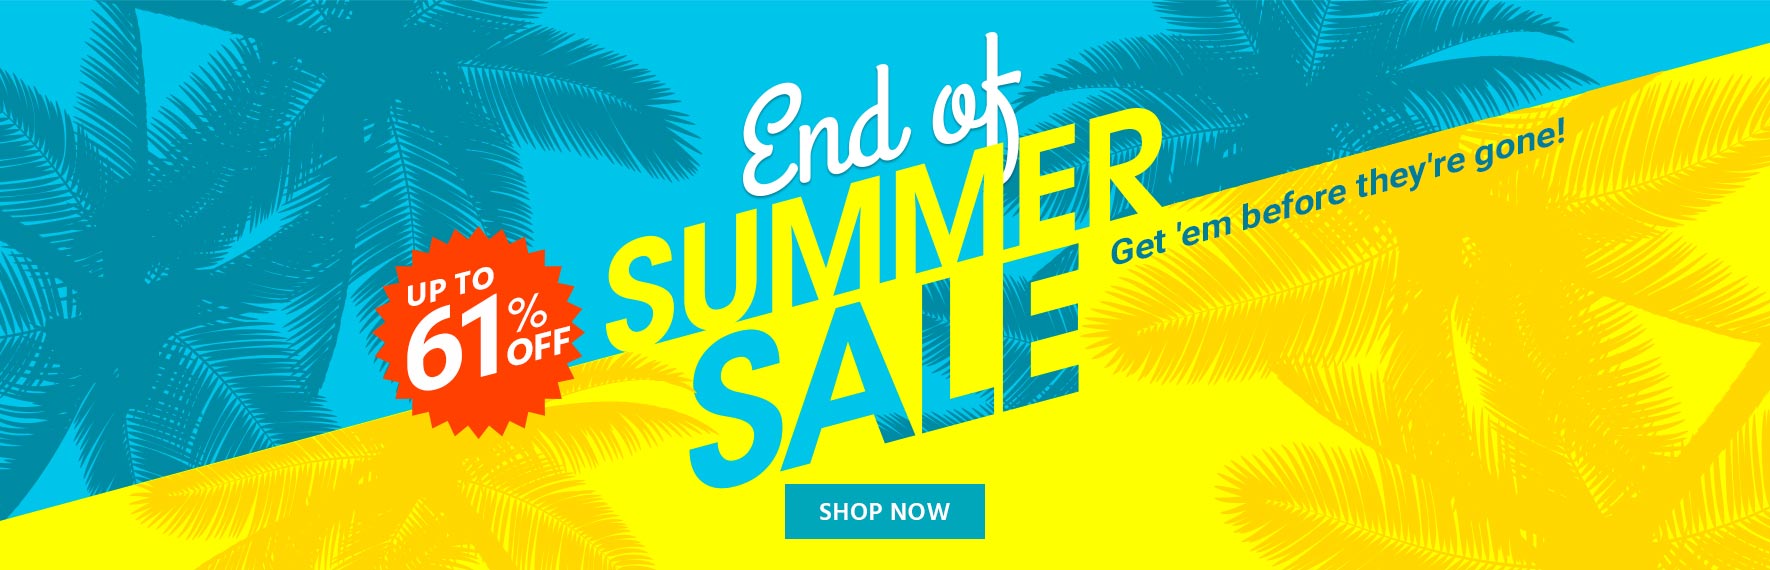 End of Summer Sale Up to 61% off Get 